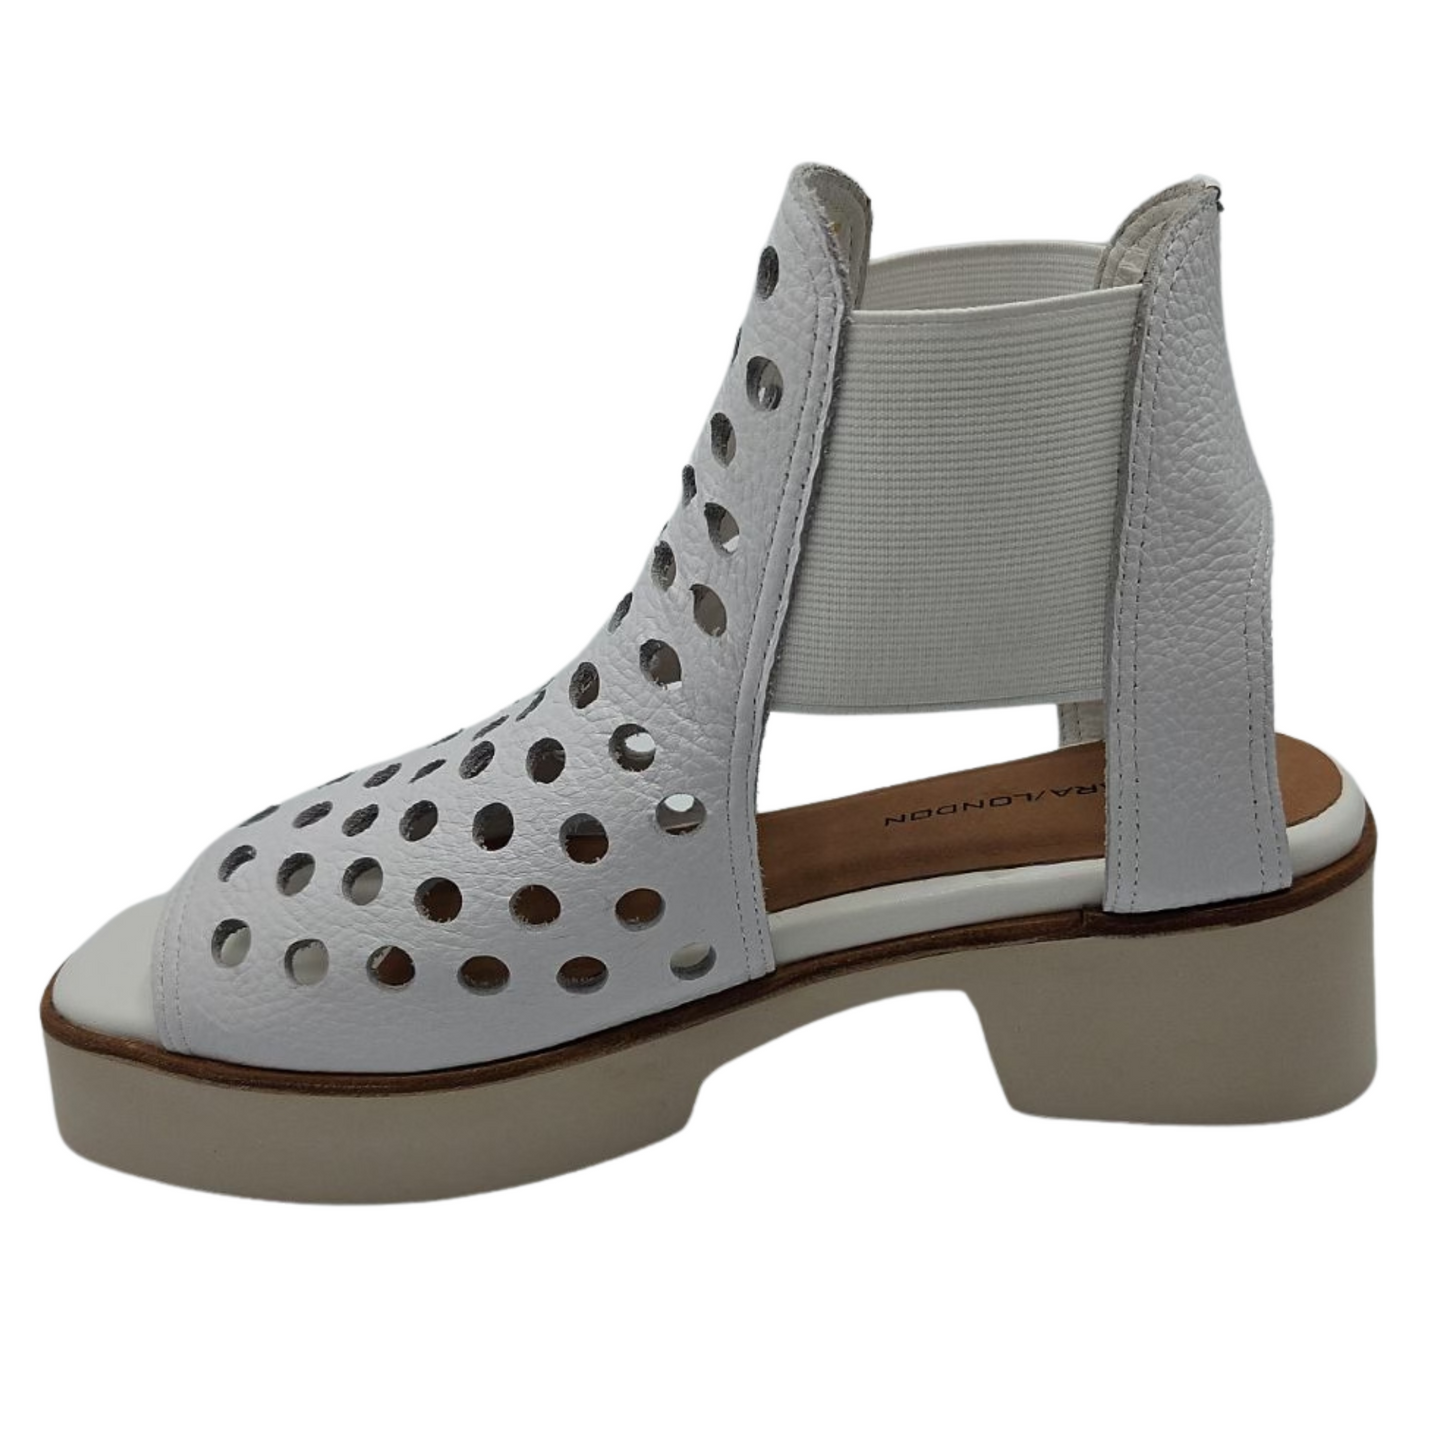 Left facing view of white perforated leather sandals with elastic sides and platform sole